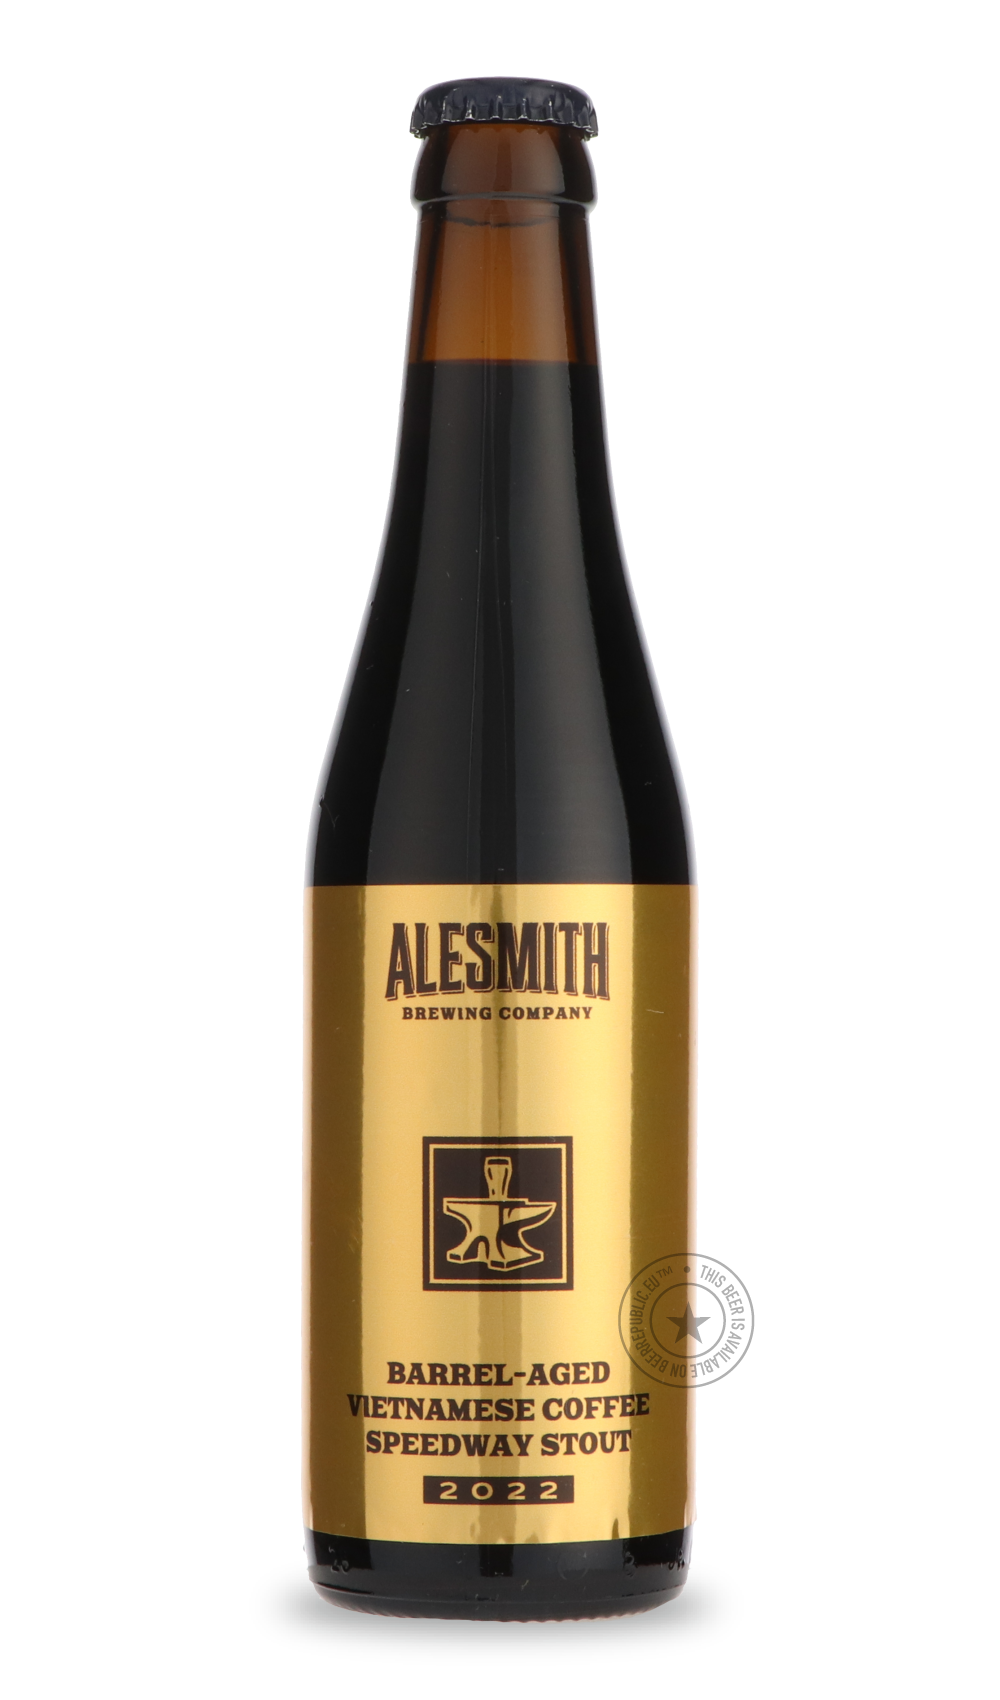 -AleSmith- Barrel-Aged Vietnamese Coffee Speedway Stout 2022-Stout & Porter- Only @ Beer Republic - The best online beer store for American & Canadian craft beer - Buy beer online from the USA and Canada - Bier online kopen - Amerikaans bier kopen - Craft beer store - Craft beer kopen - Amerikanisch bier kaufen - Bier online kaufen - Acheter biere online - IPA - Stout - Porter - New England IPA - Hazy IPA - Imperial Stout - Barrel Aged - Barrel Aged Imperial Stout - Brown - Dark beer - Blond - Blonde - Pils